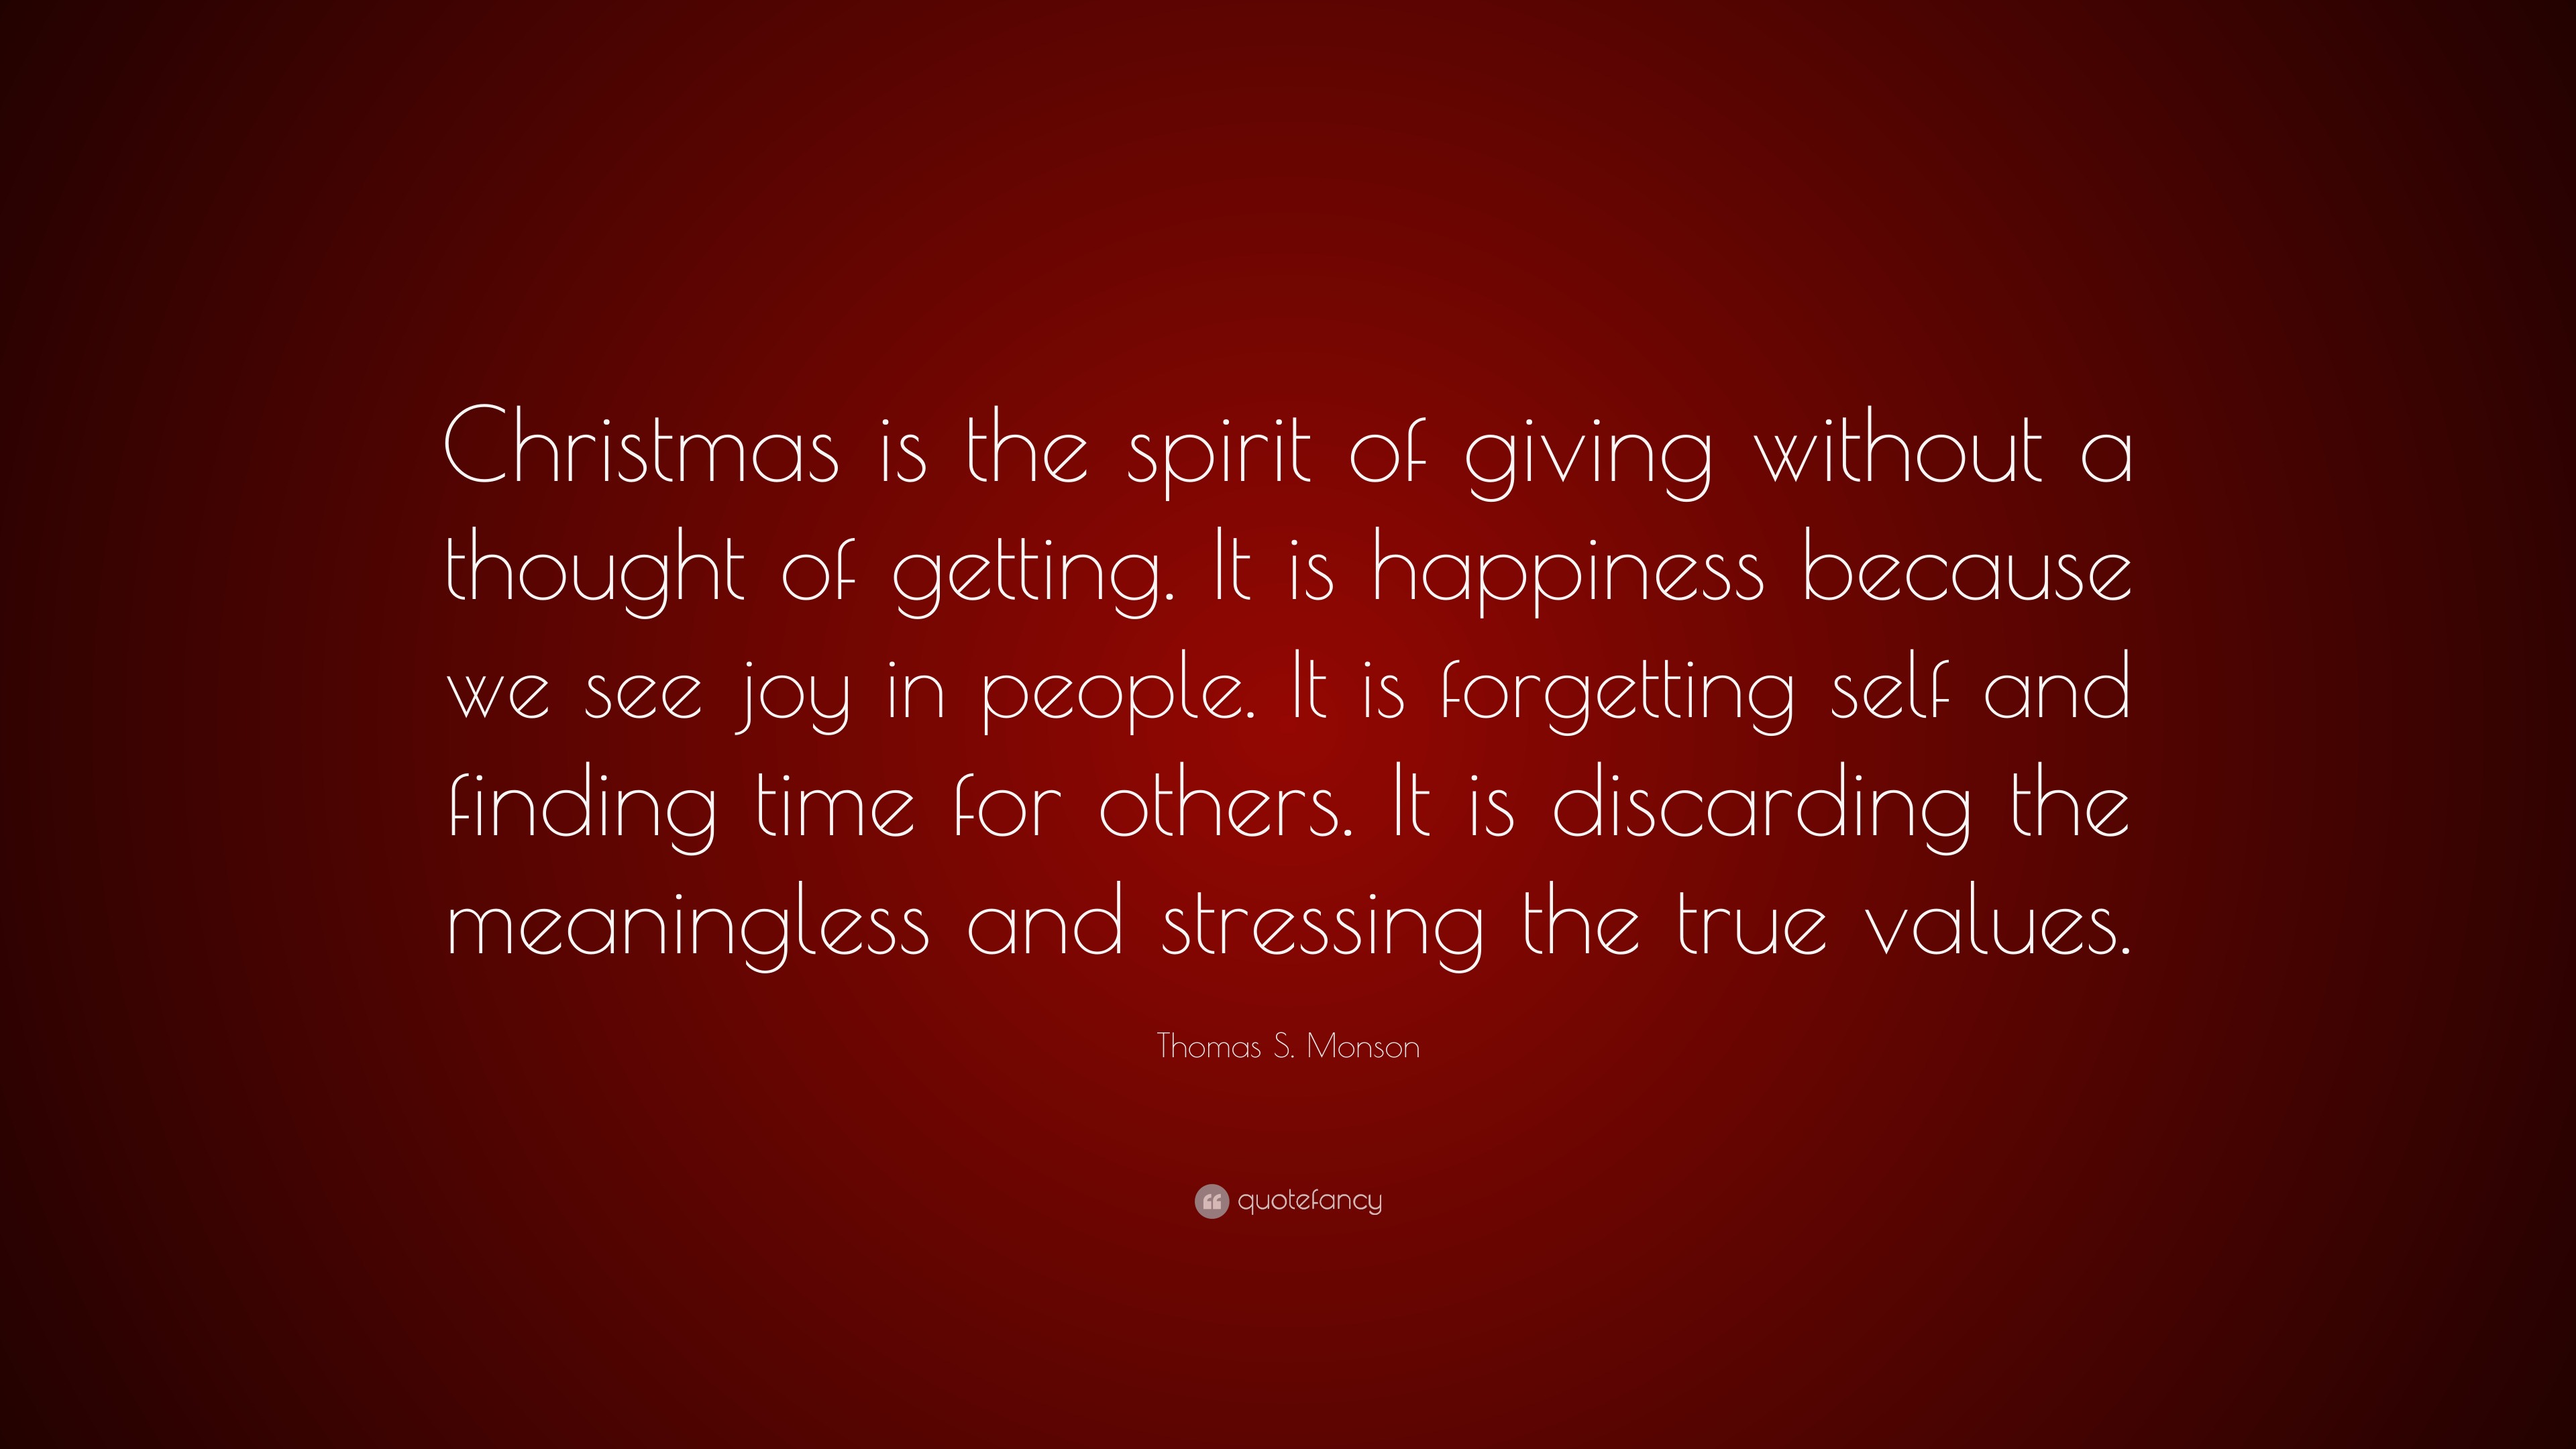 Thomas S. Monson Quote: “Christmas is the spirit of giving without a ...